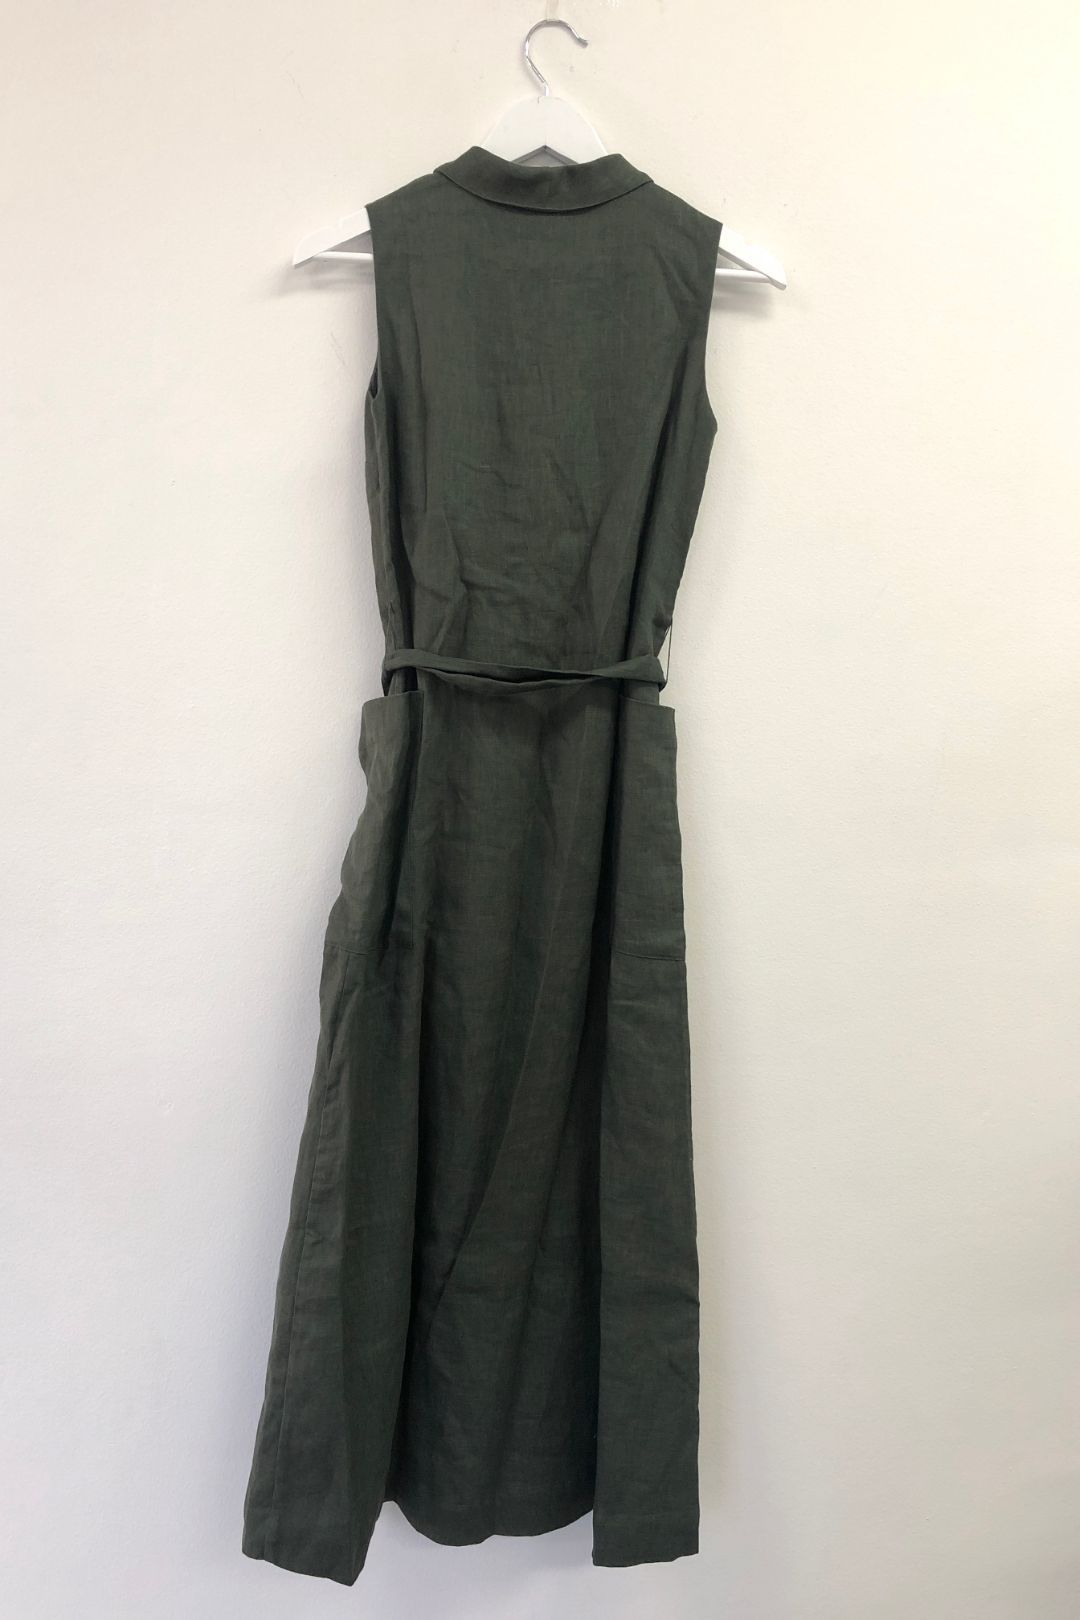 Country Road - Linen Button Front Maxi Dress